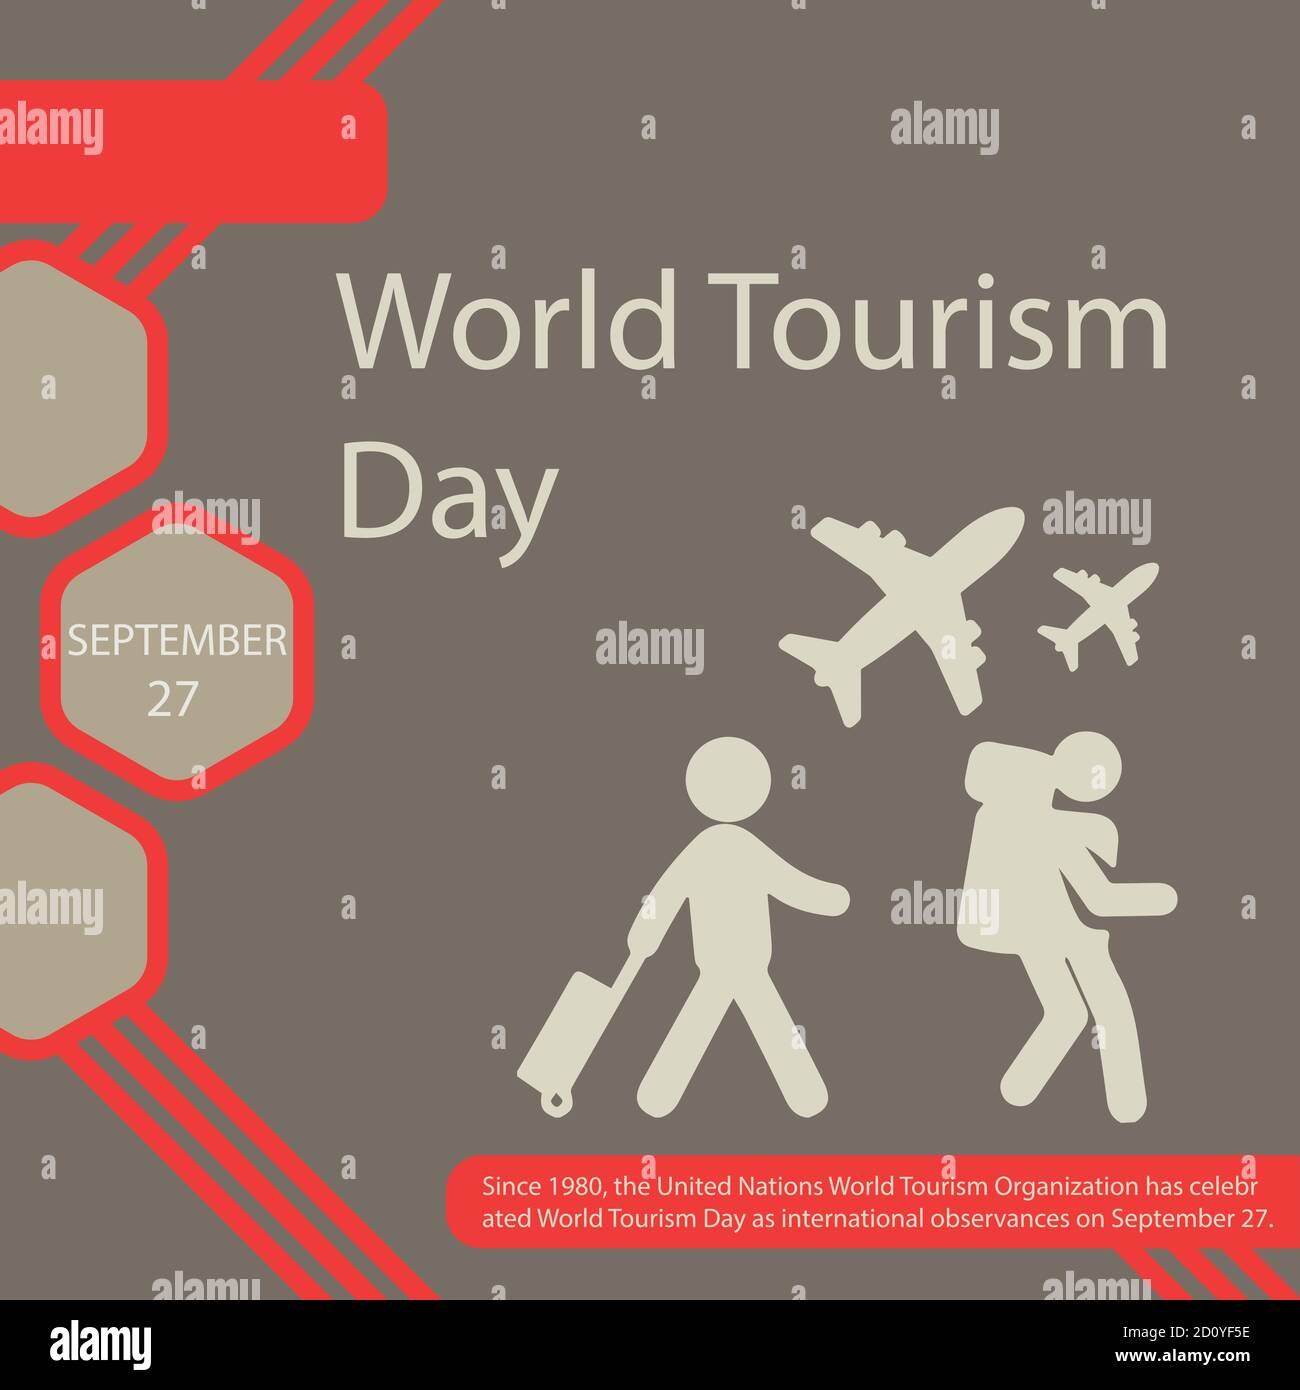 Since 1980, the United Nations World Tourism Organization has celebrated World Tourism Day as international observances on September 27. Stock Vector